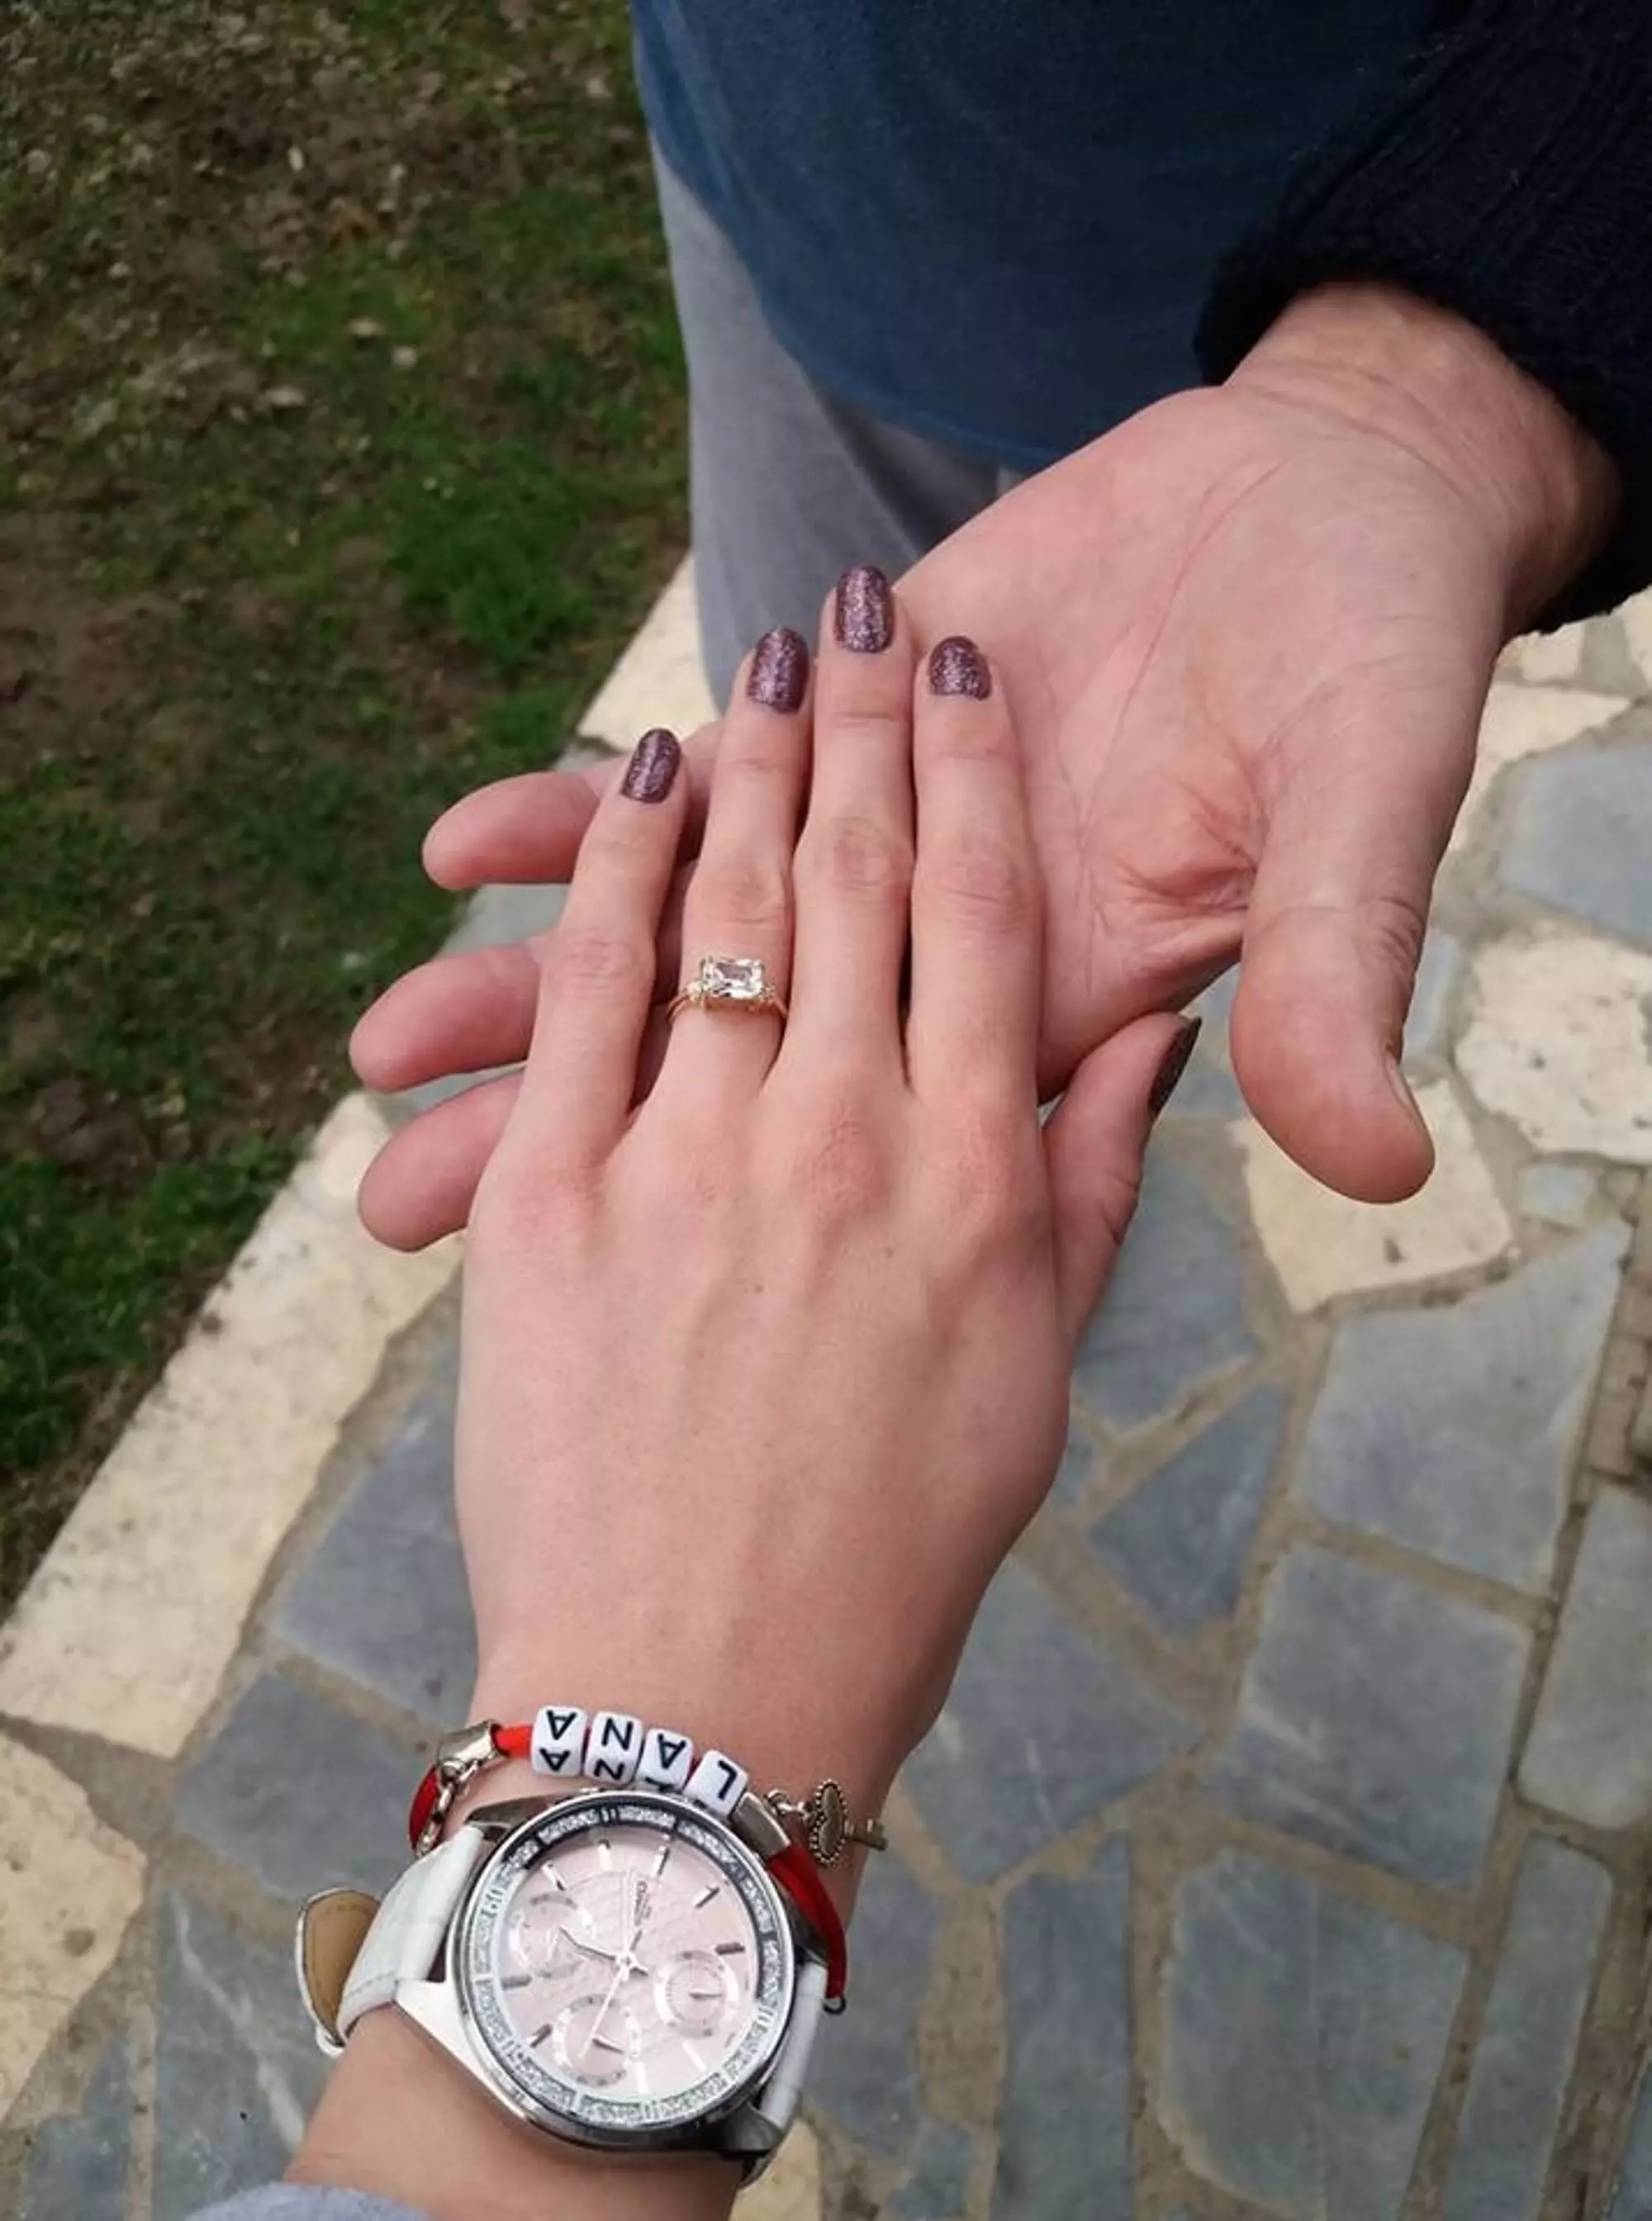 They are now engaged.